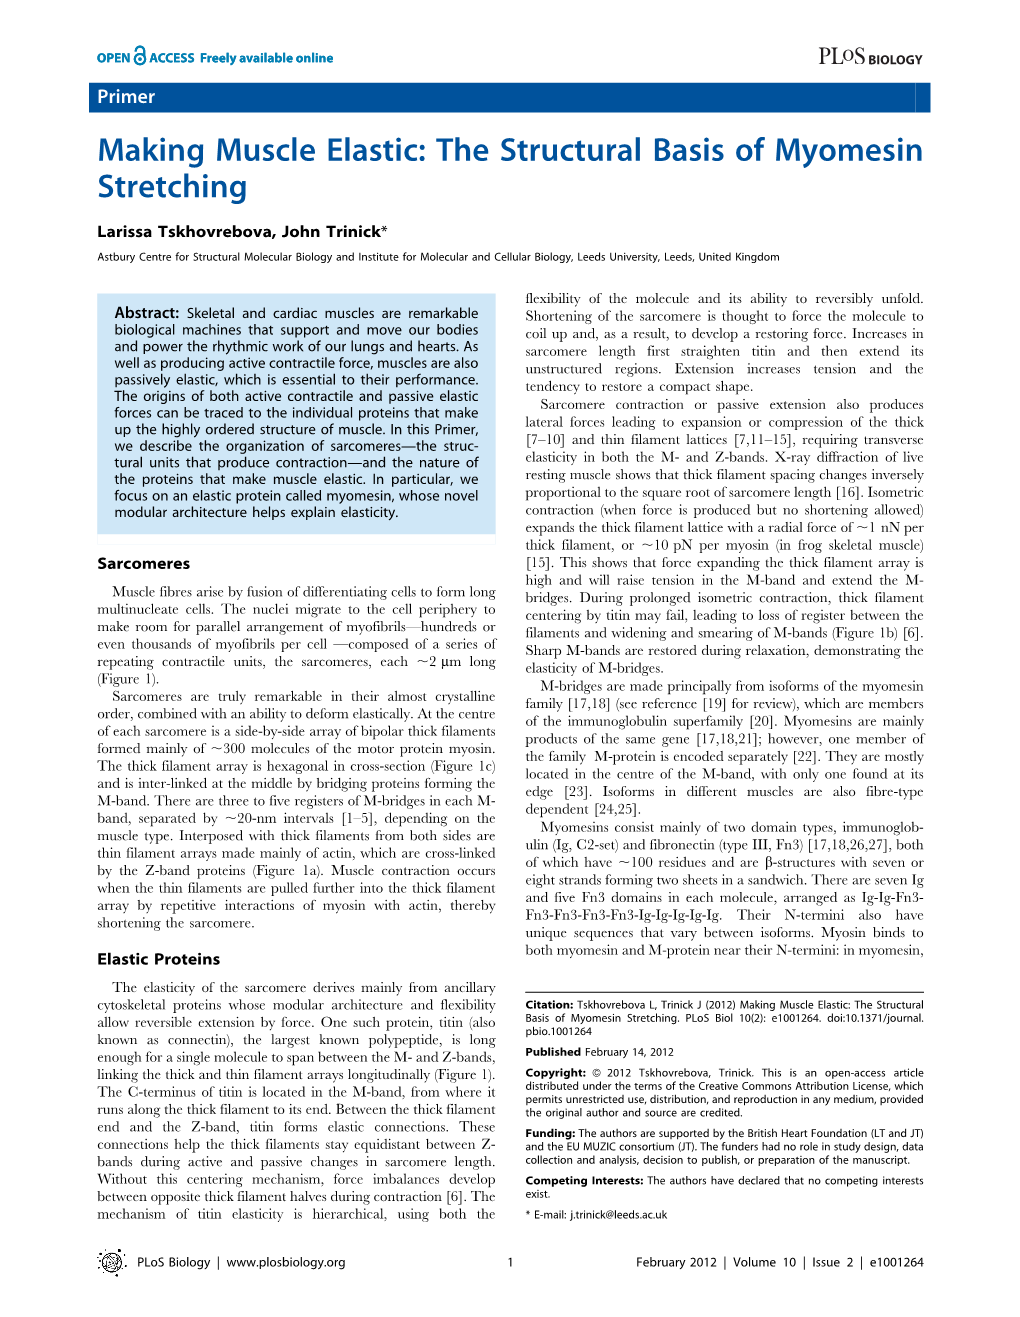 The Structural Basis of Myomesin Stretching